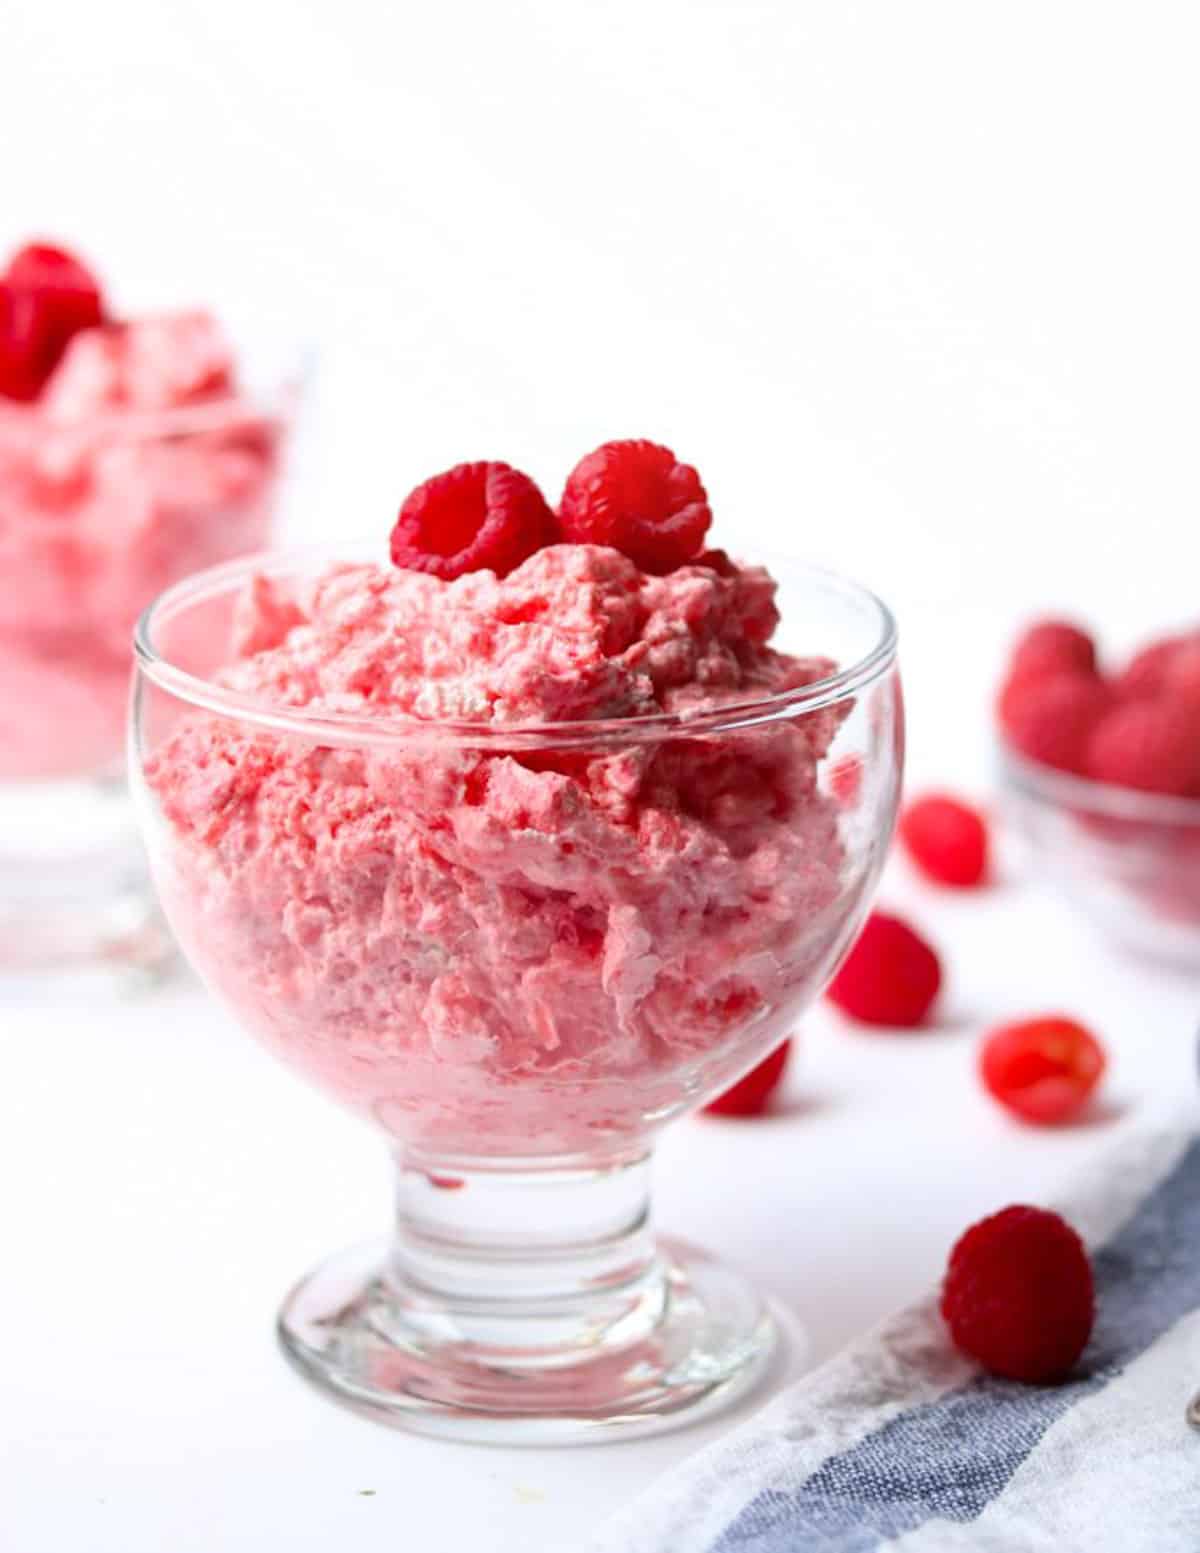 Raspberry Jello Salad in a glass topped with raspberries